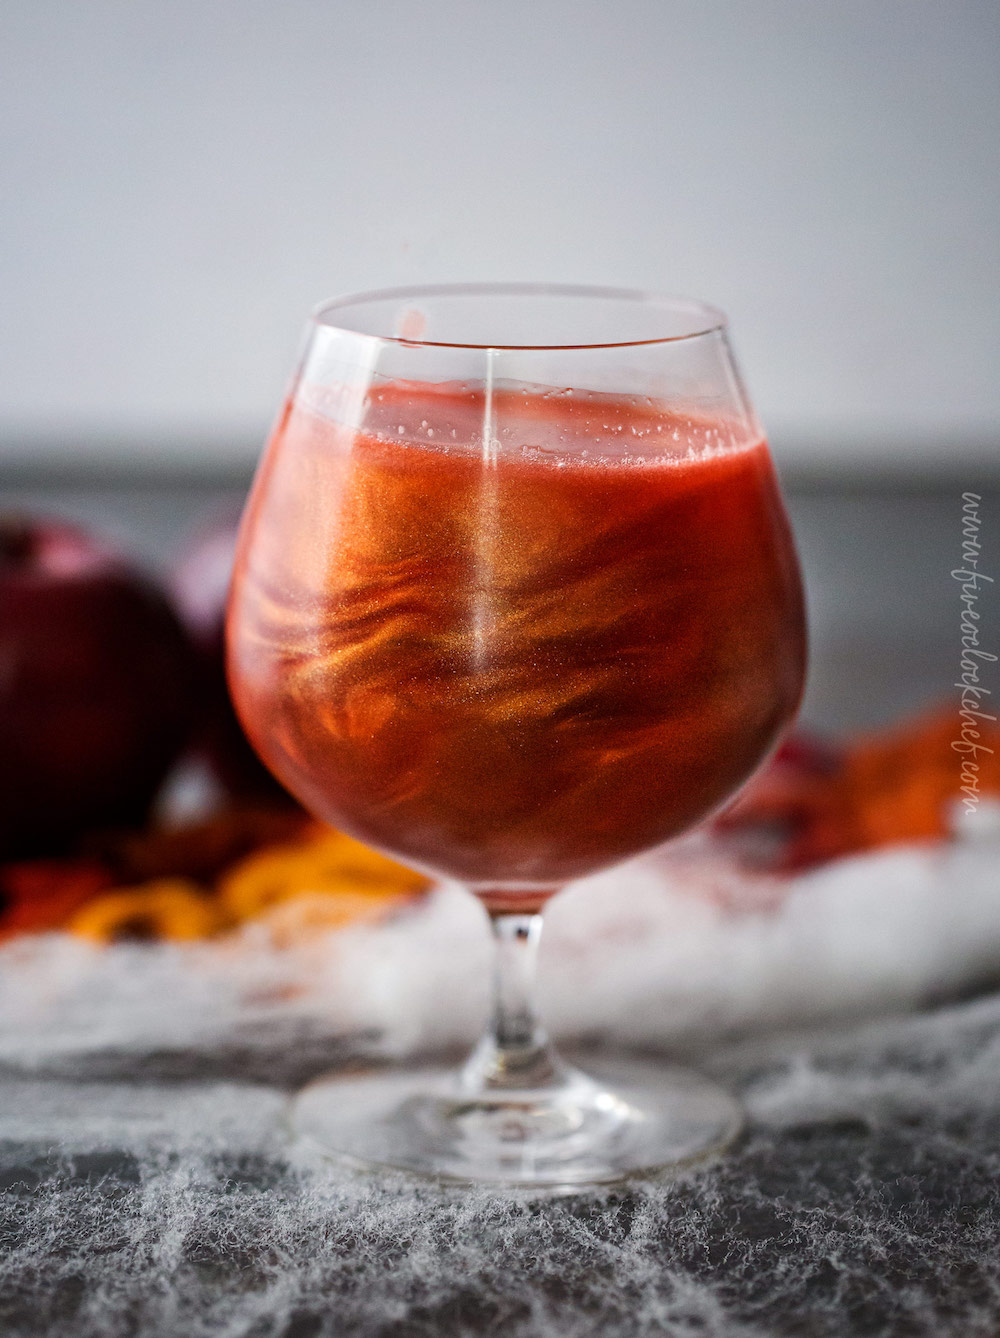 Skinny Halloween cocktails: Poisoned Apple Cider cocktail at The 5 O'Clock Chef